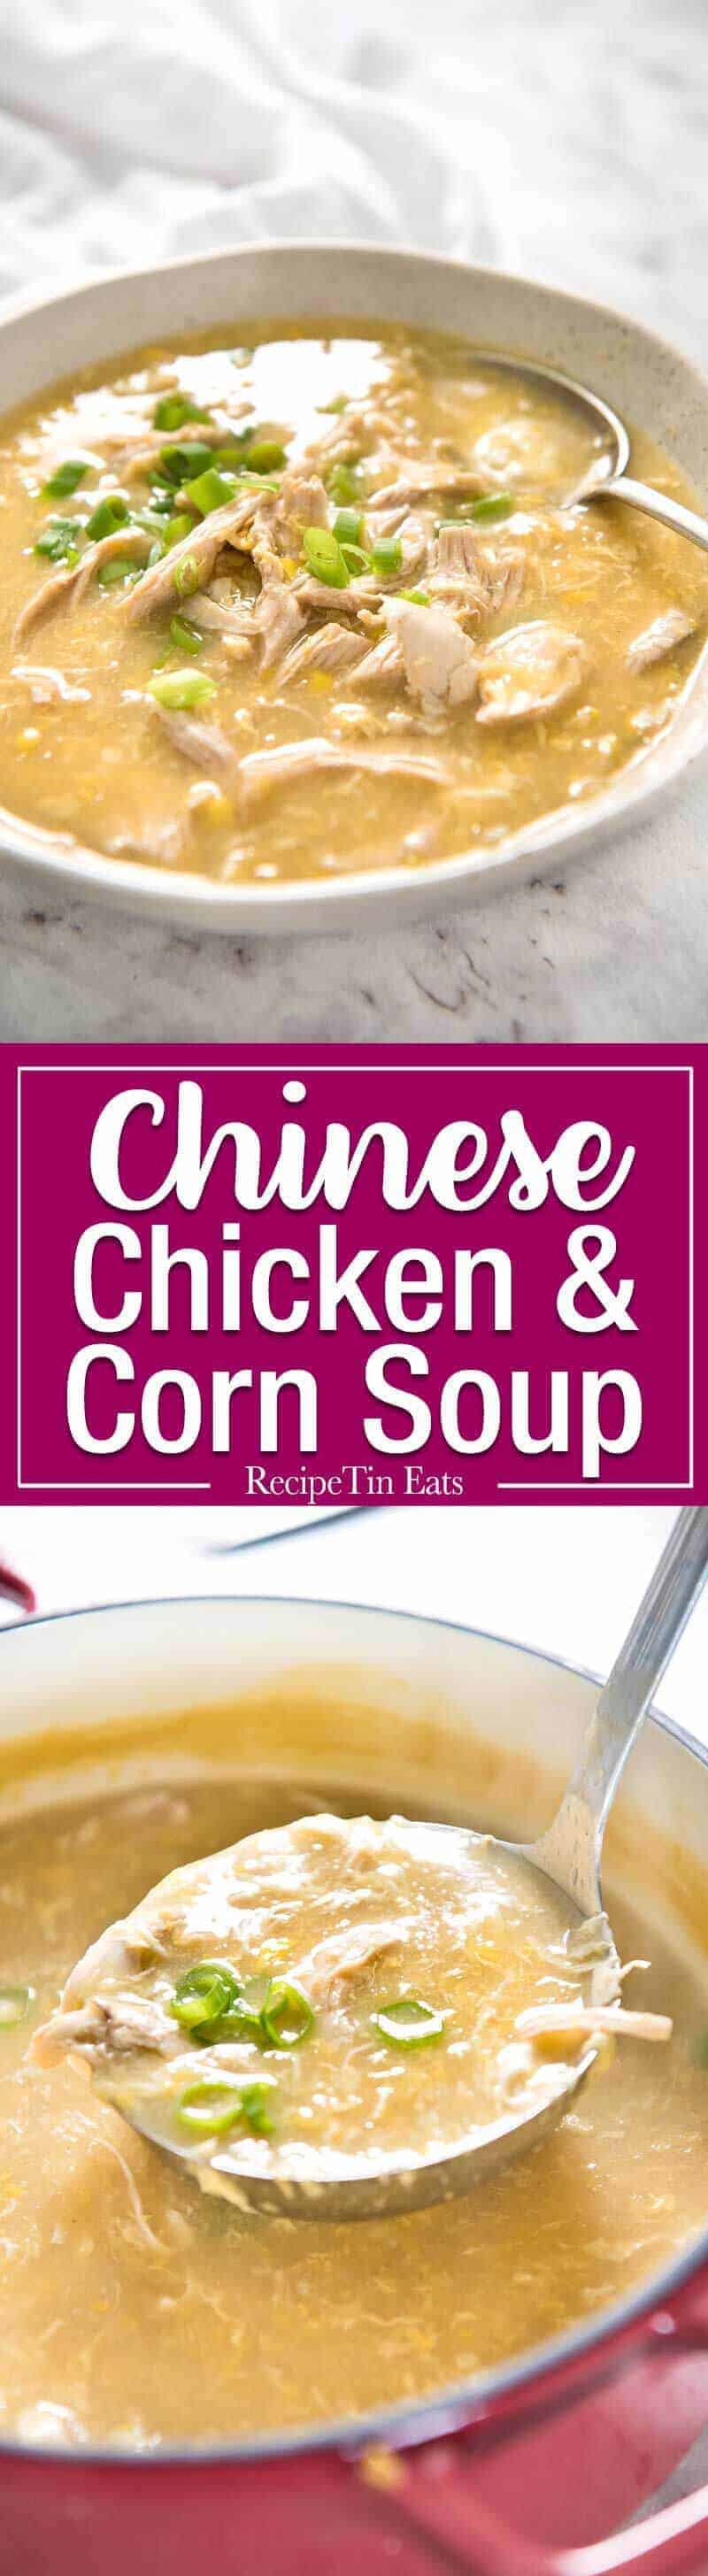 Chinese Corn Soup with Chicken | RecipeTin Eats